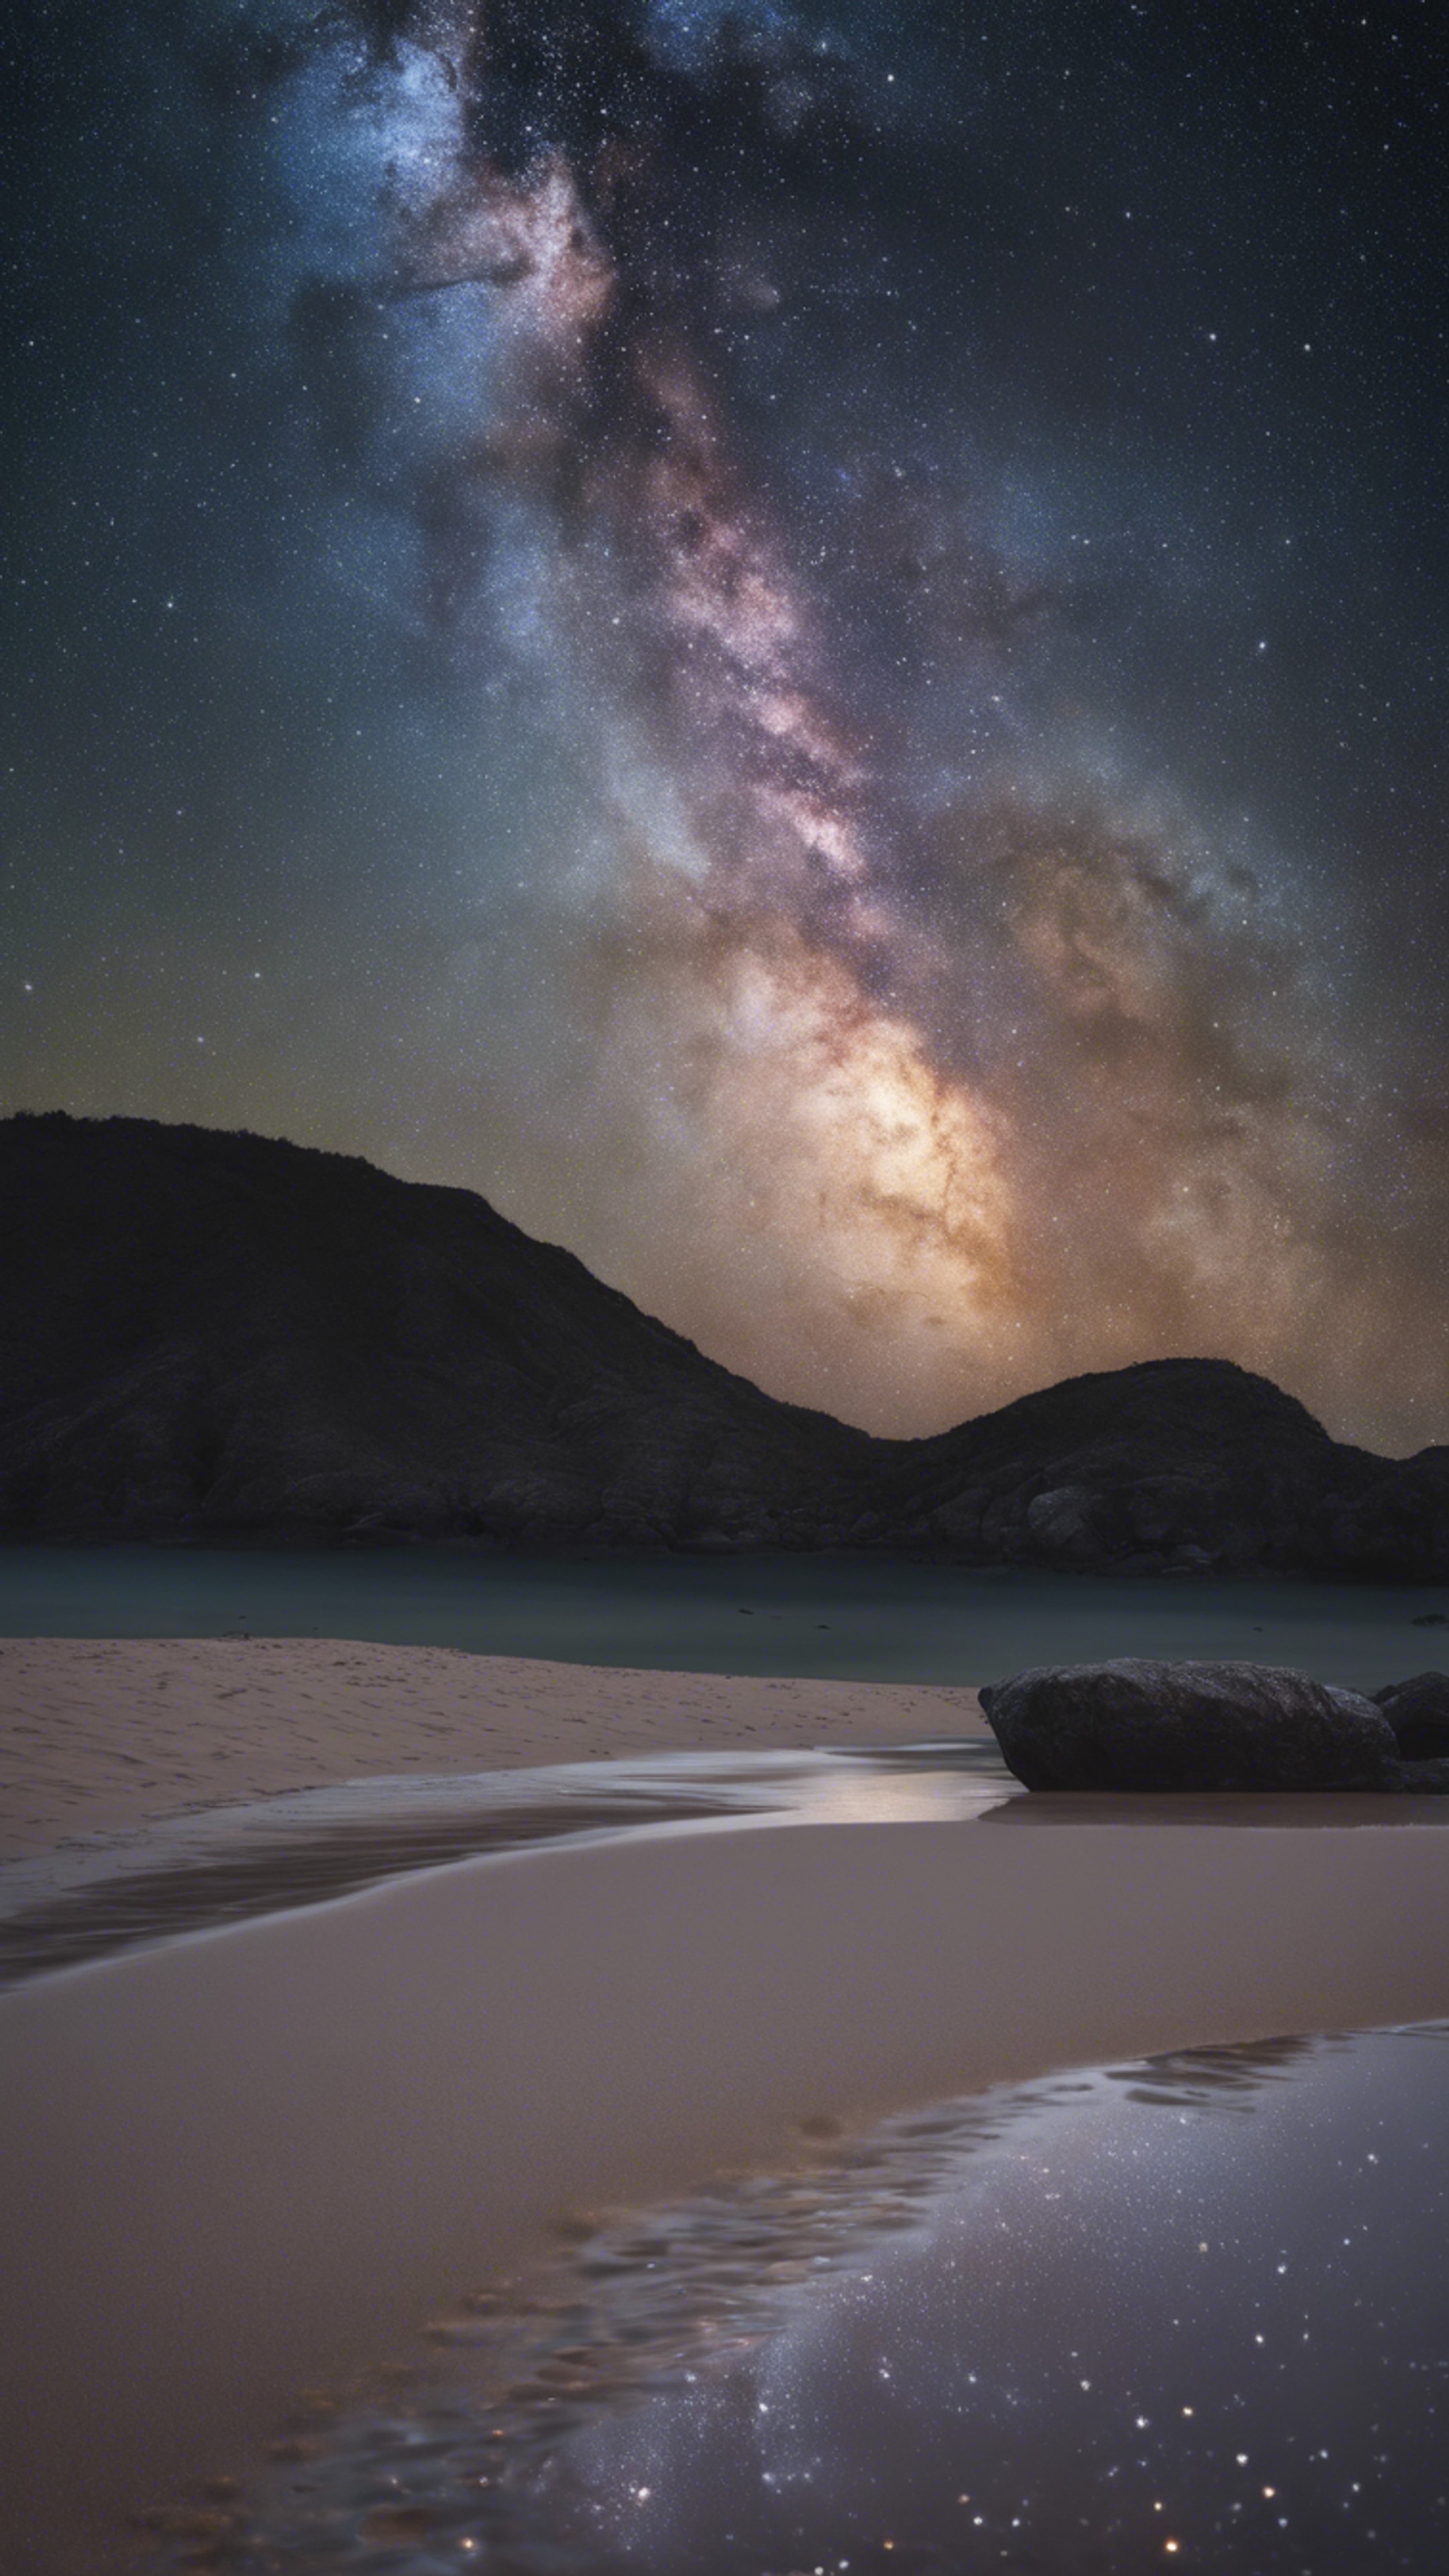 View of the Milky Way Galaxy across a dark starry night sky as seen from a deserted beach. 墙纸[ccd5588141b94e439f84]